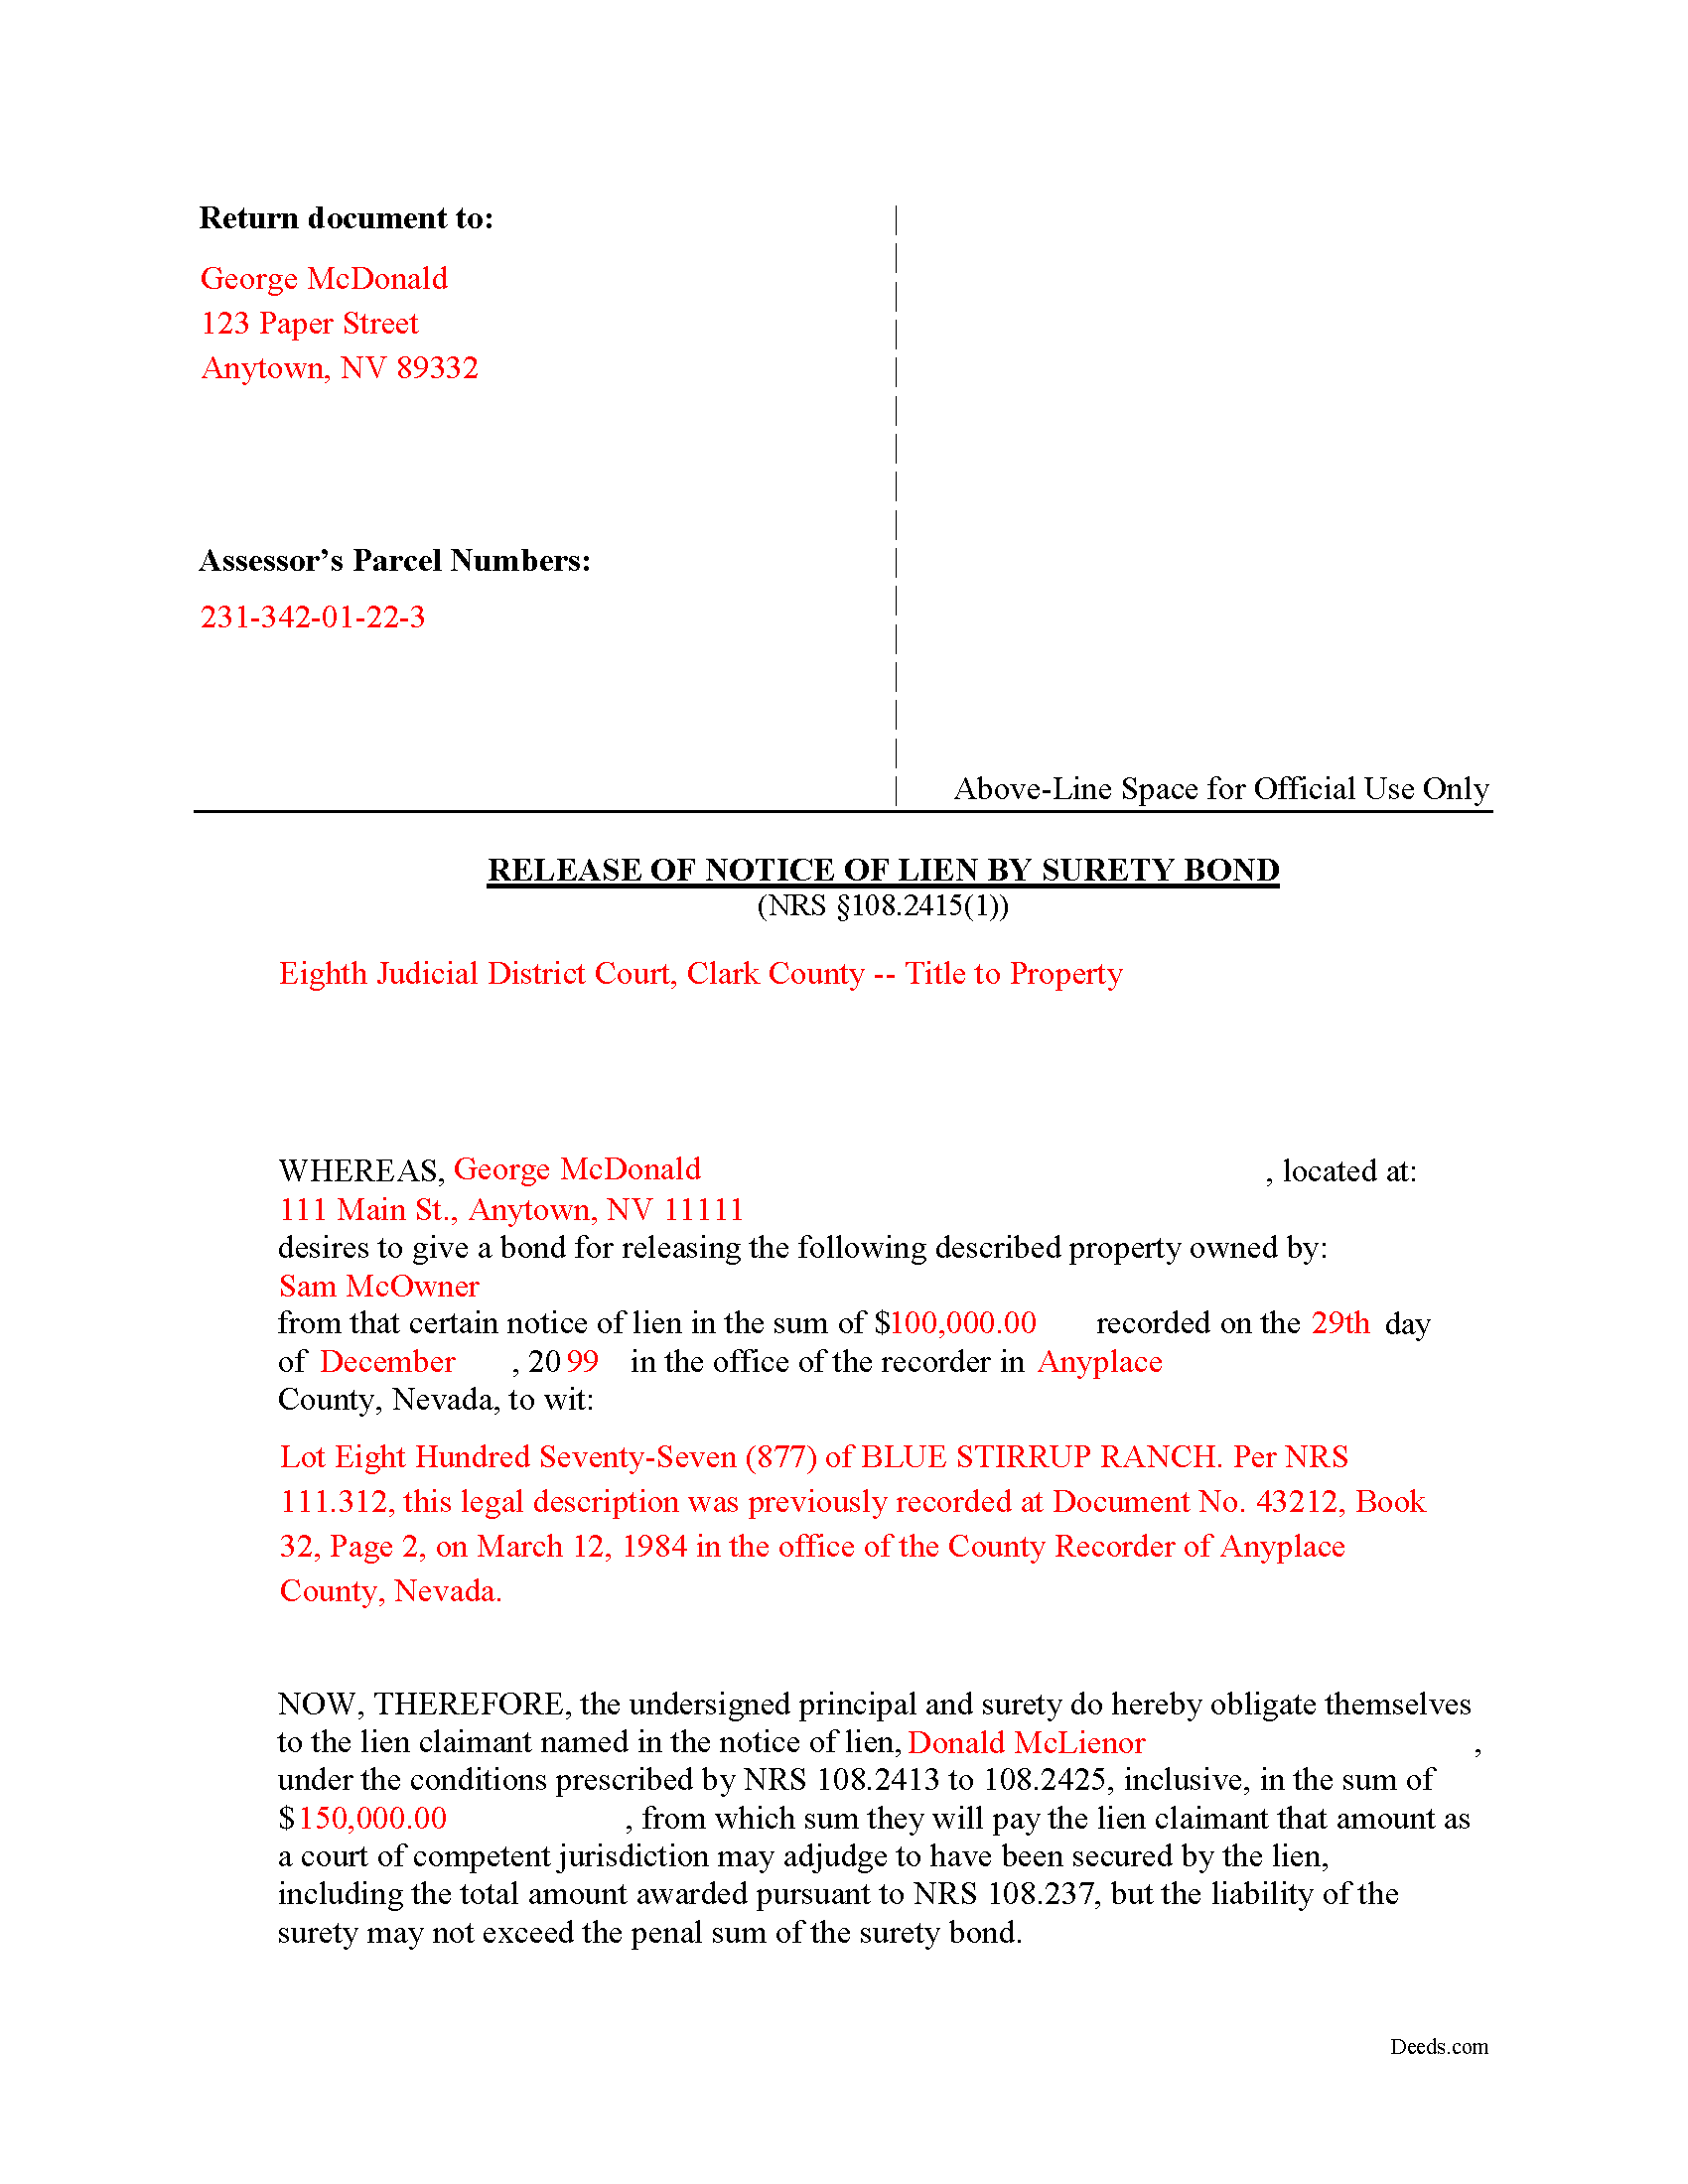 Completed Example of the Release of Notice of Lien by Surety Bond Document